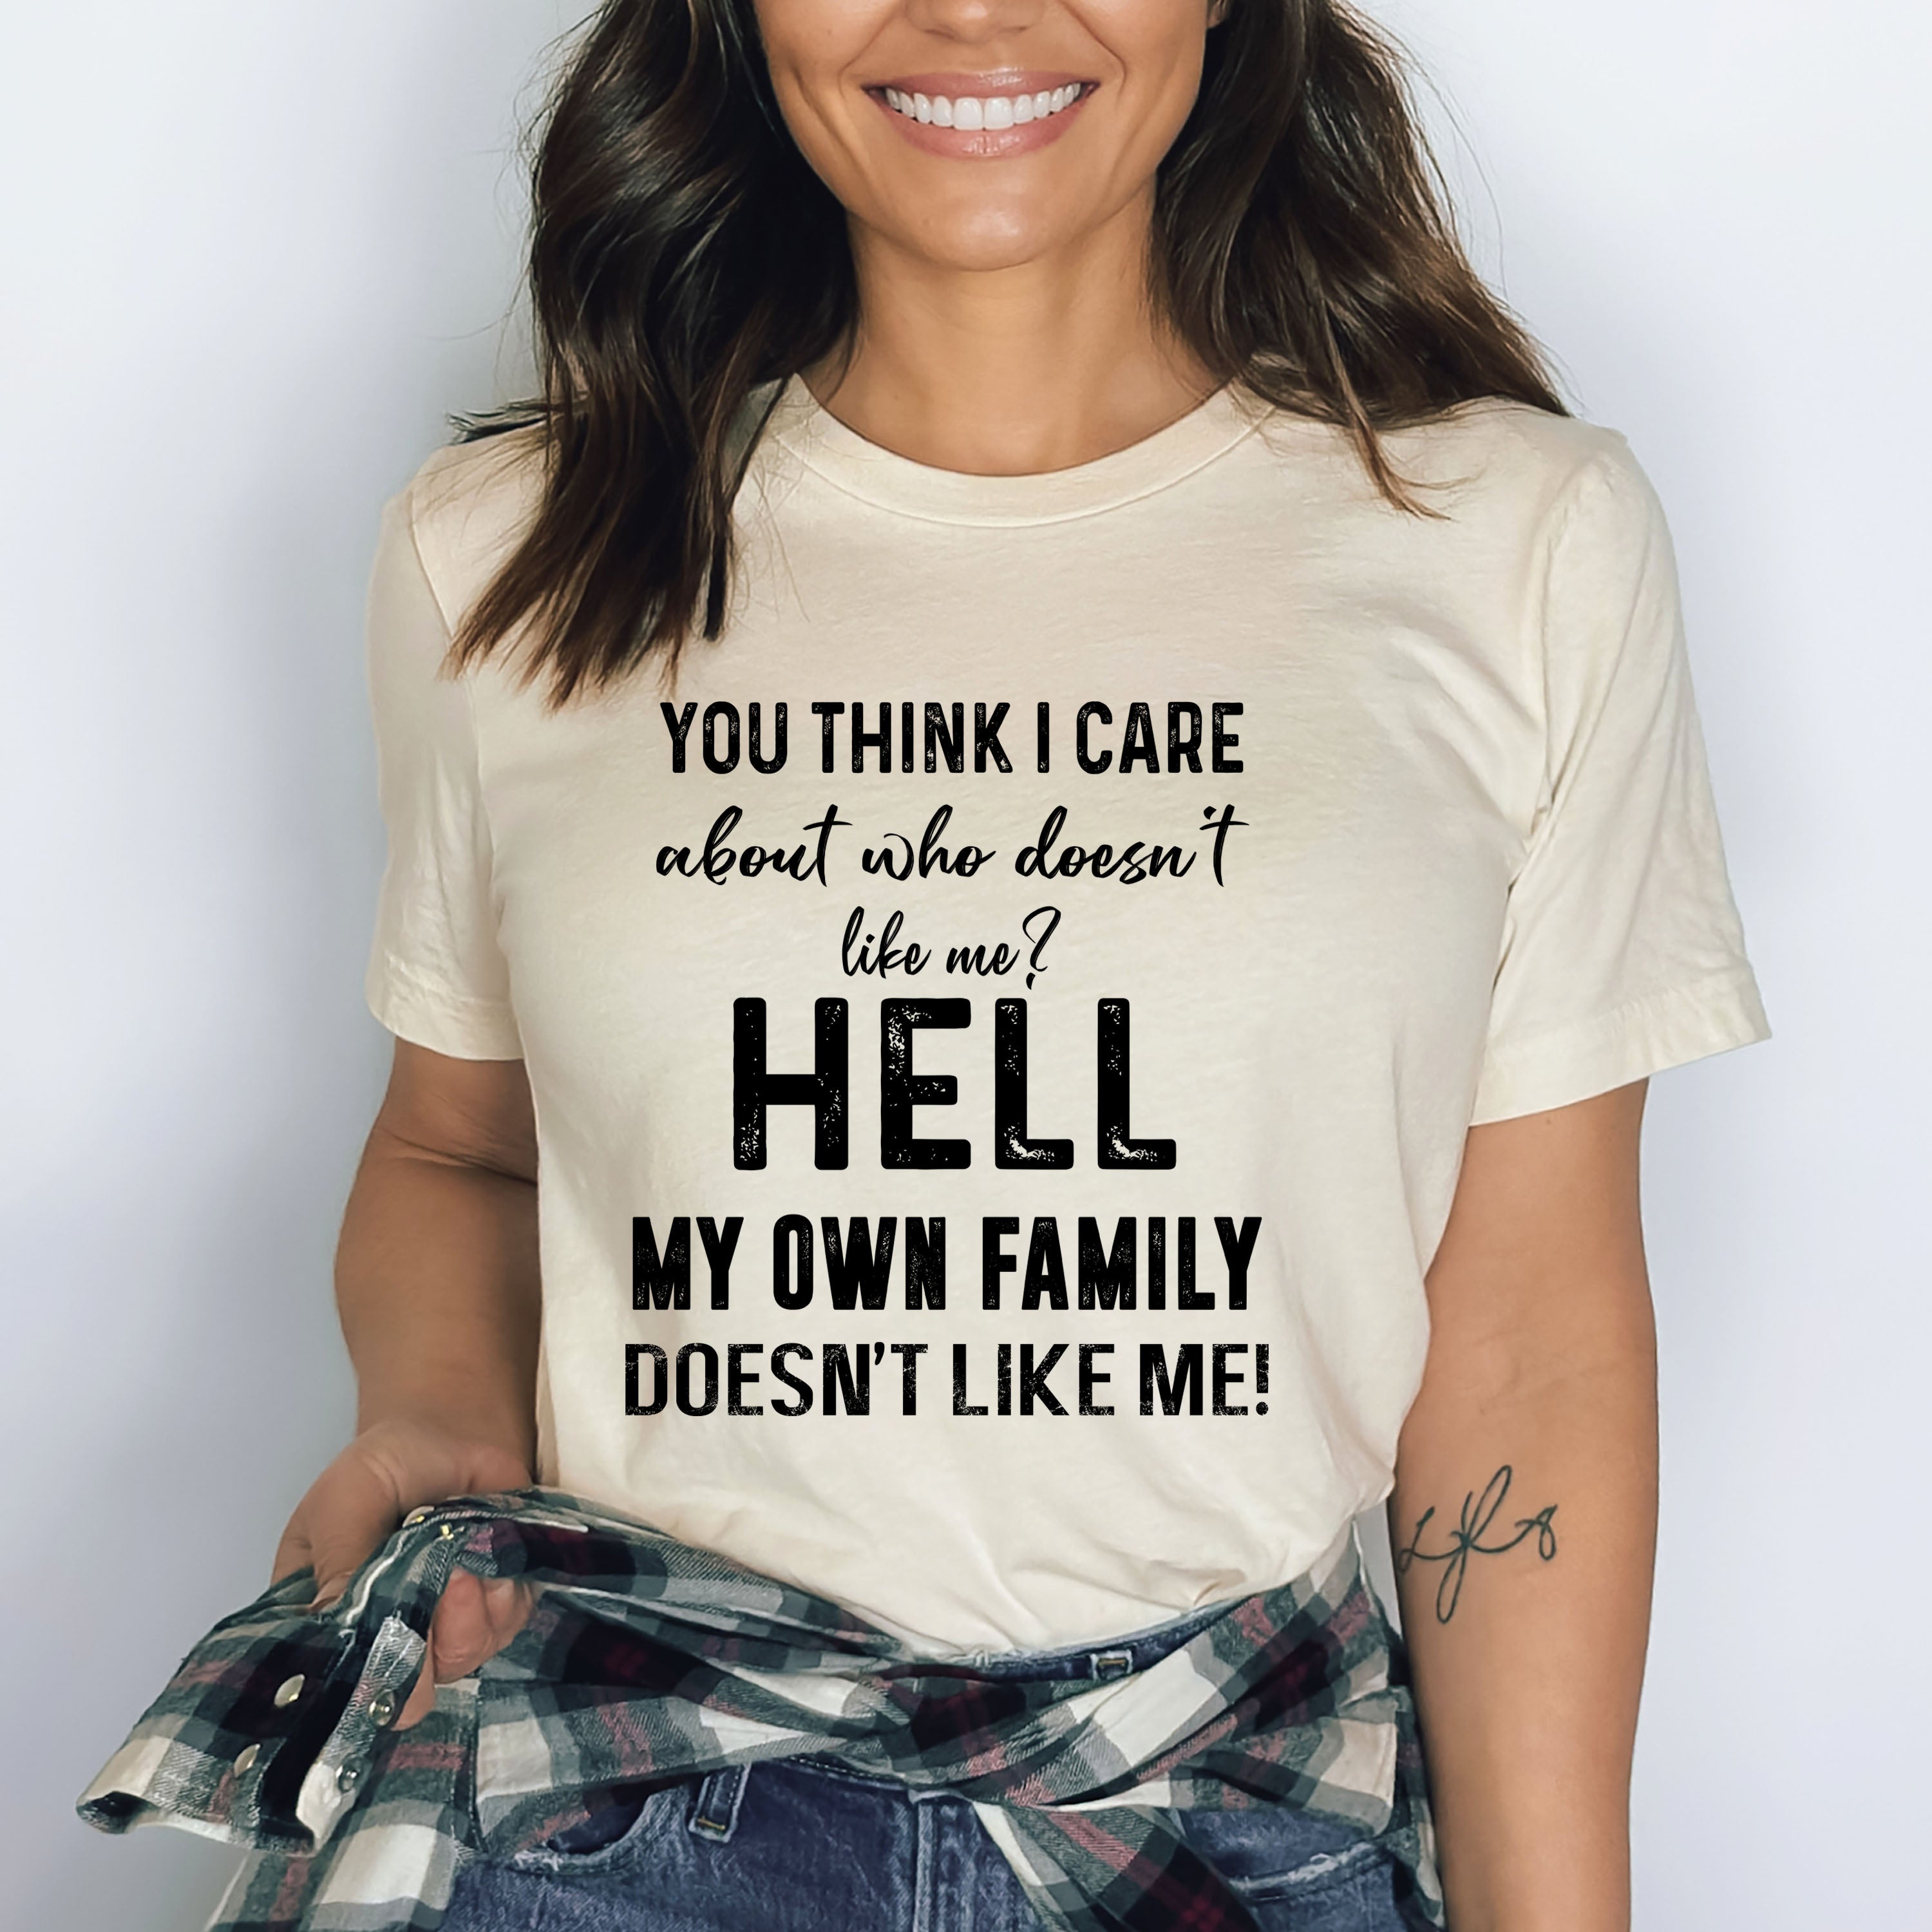 My Own Family Doesn't Like Me - Bella canvas